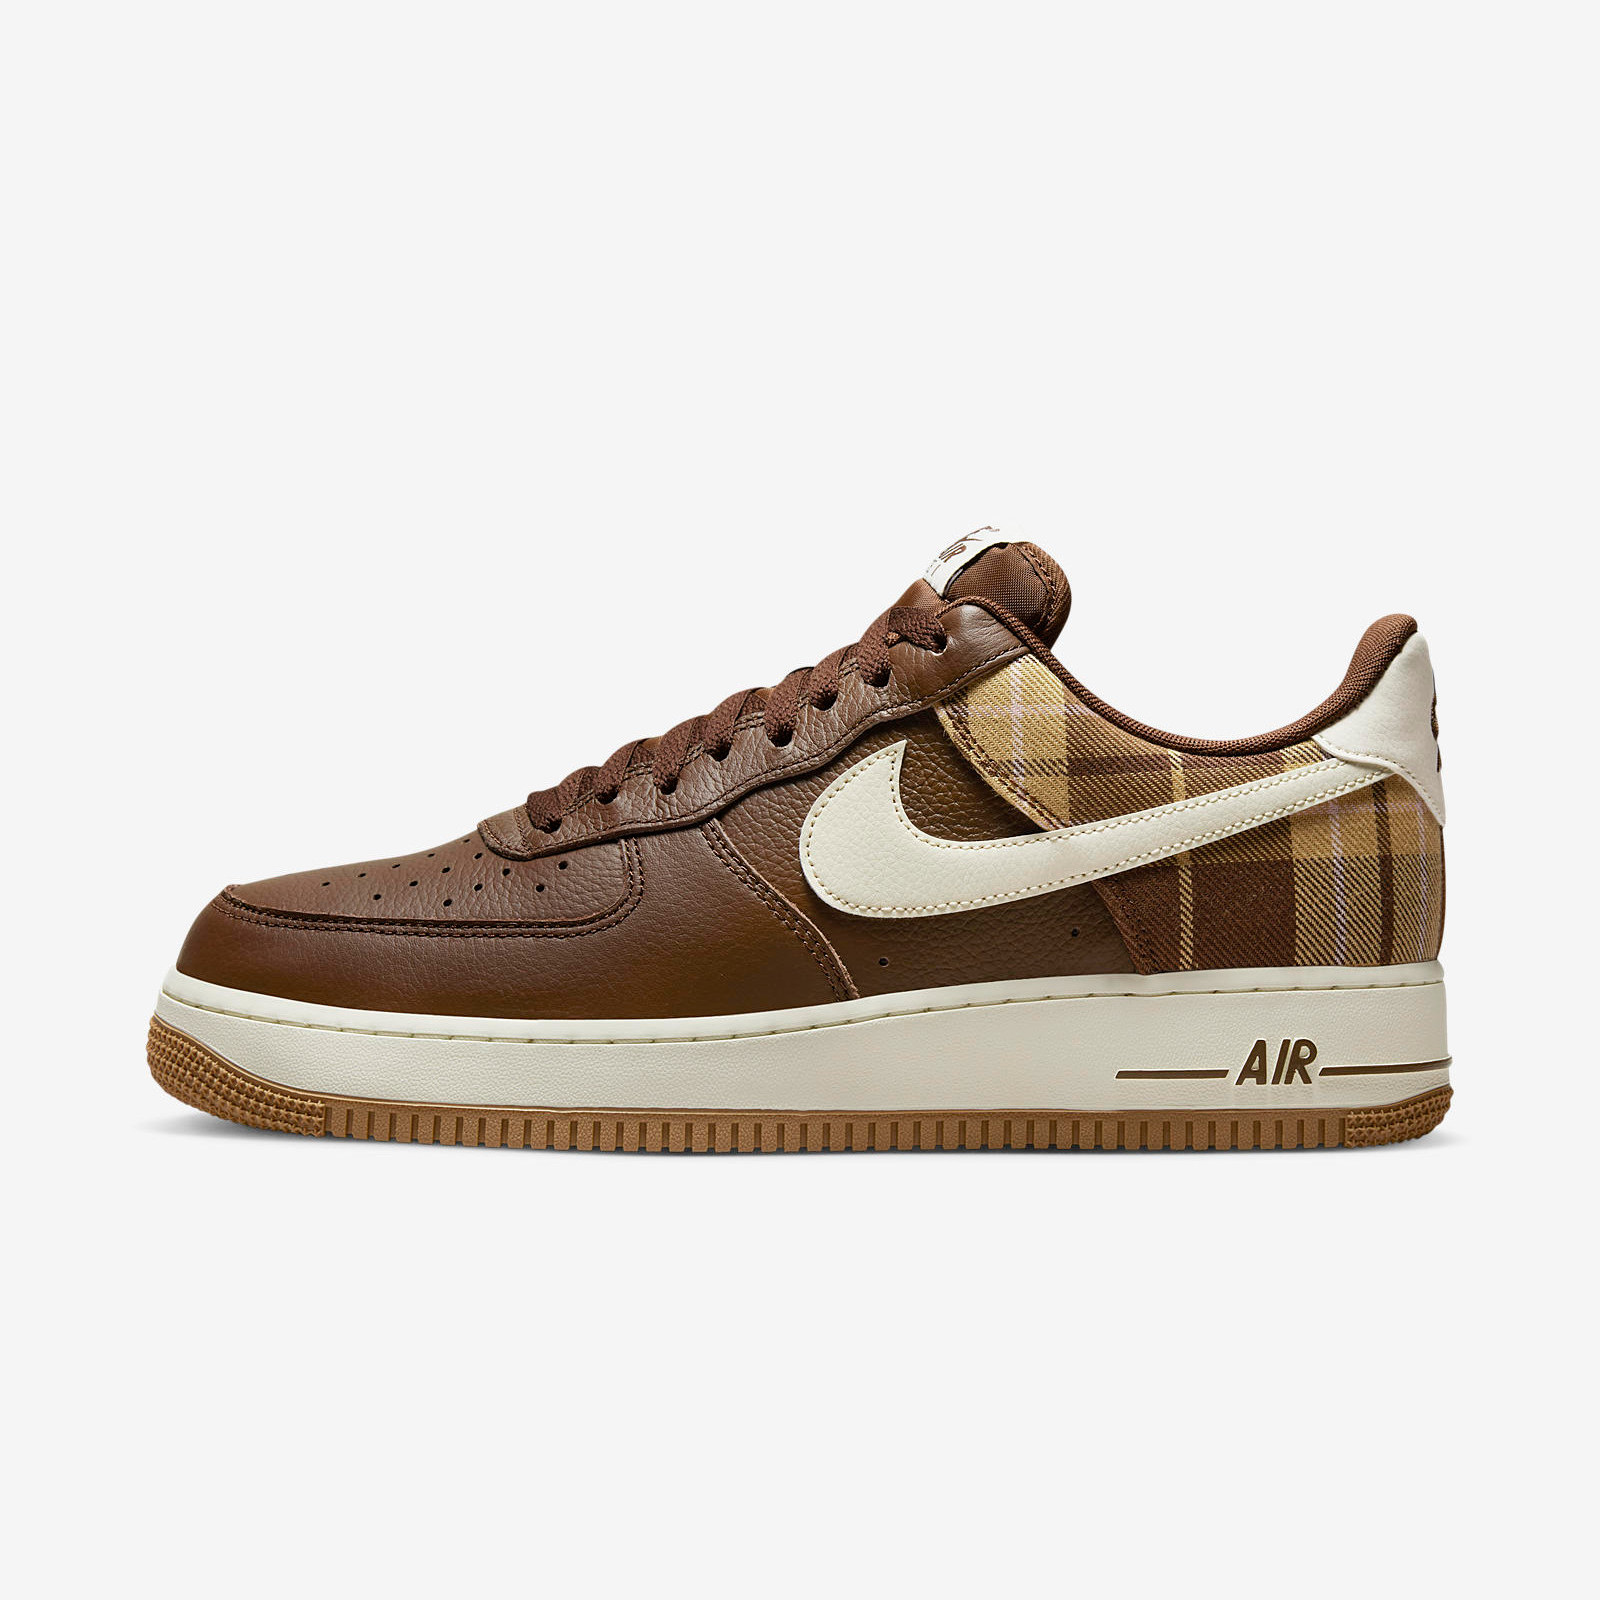 Nike Air Force 1 Low
« Cacao Wow »